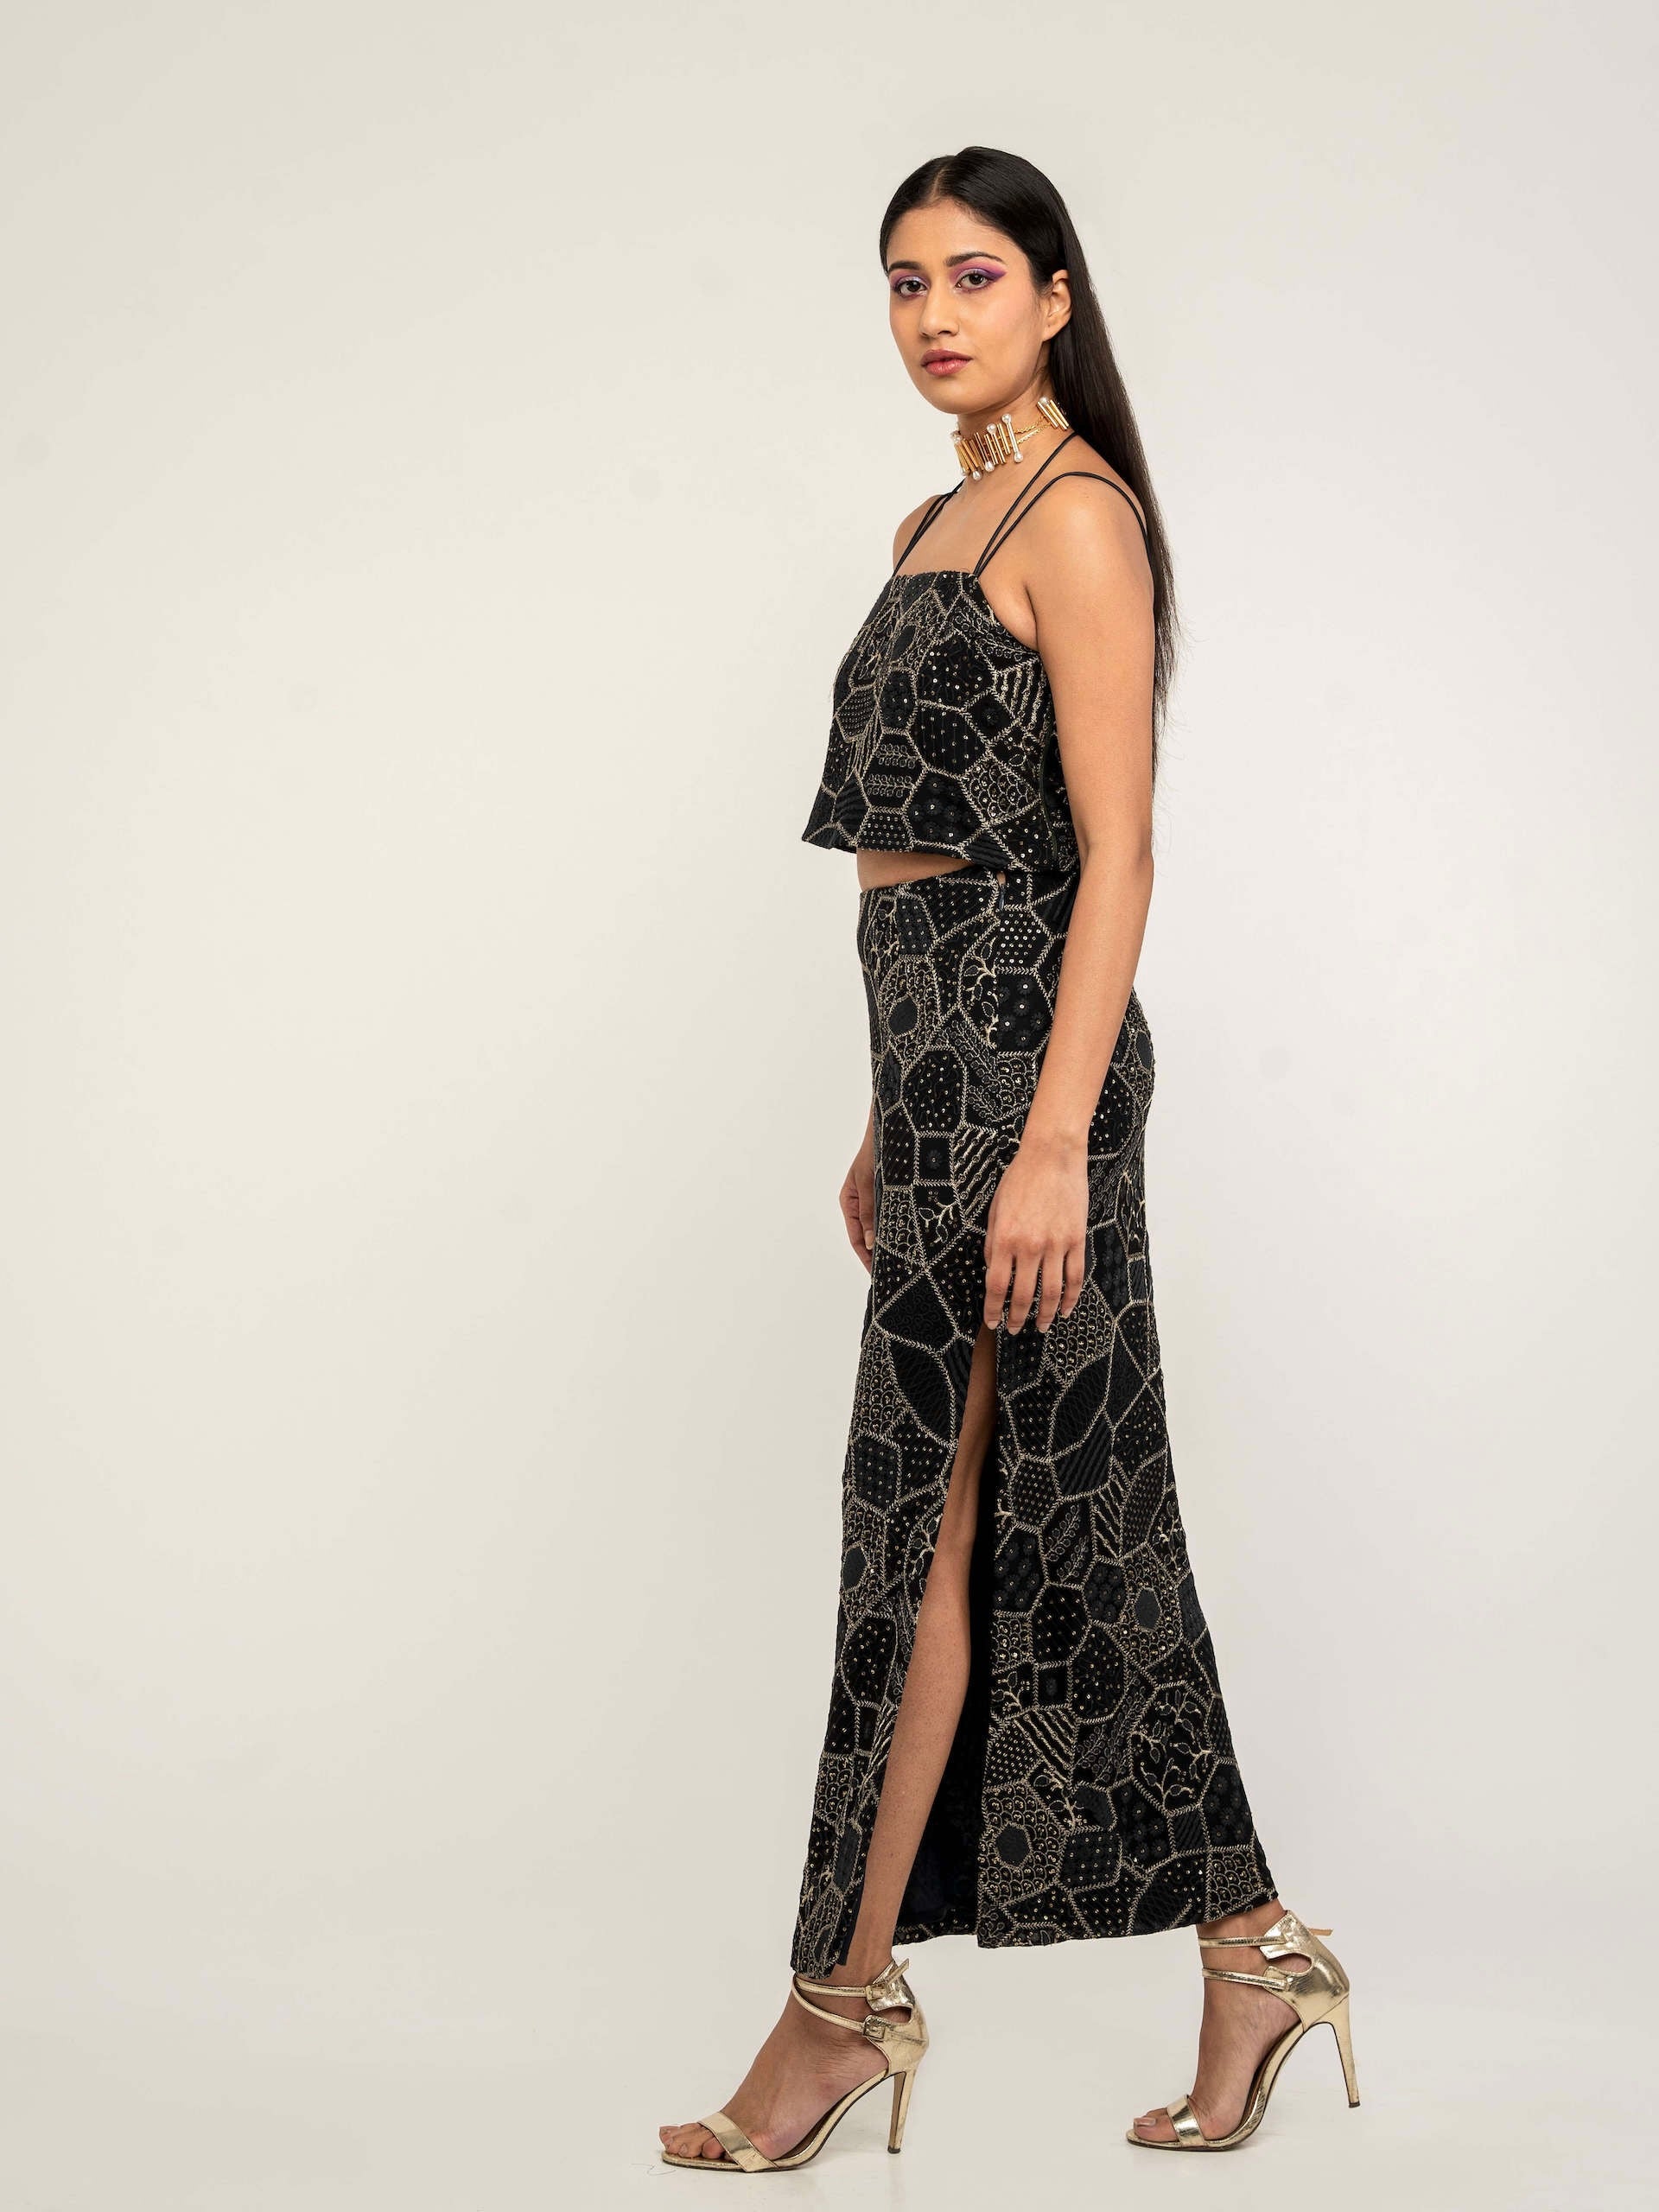 The Amara consists of a high-waisted, elastic waistband skirt with a spaghetti-strapped blouse and a skinny dupatta.  